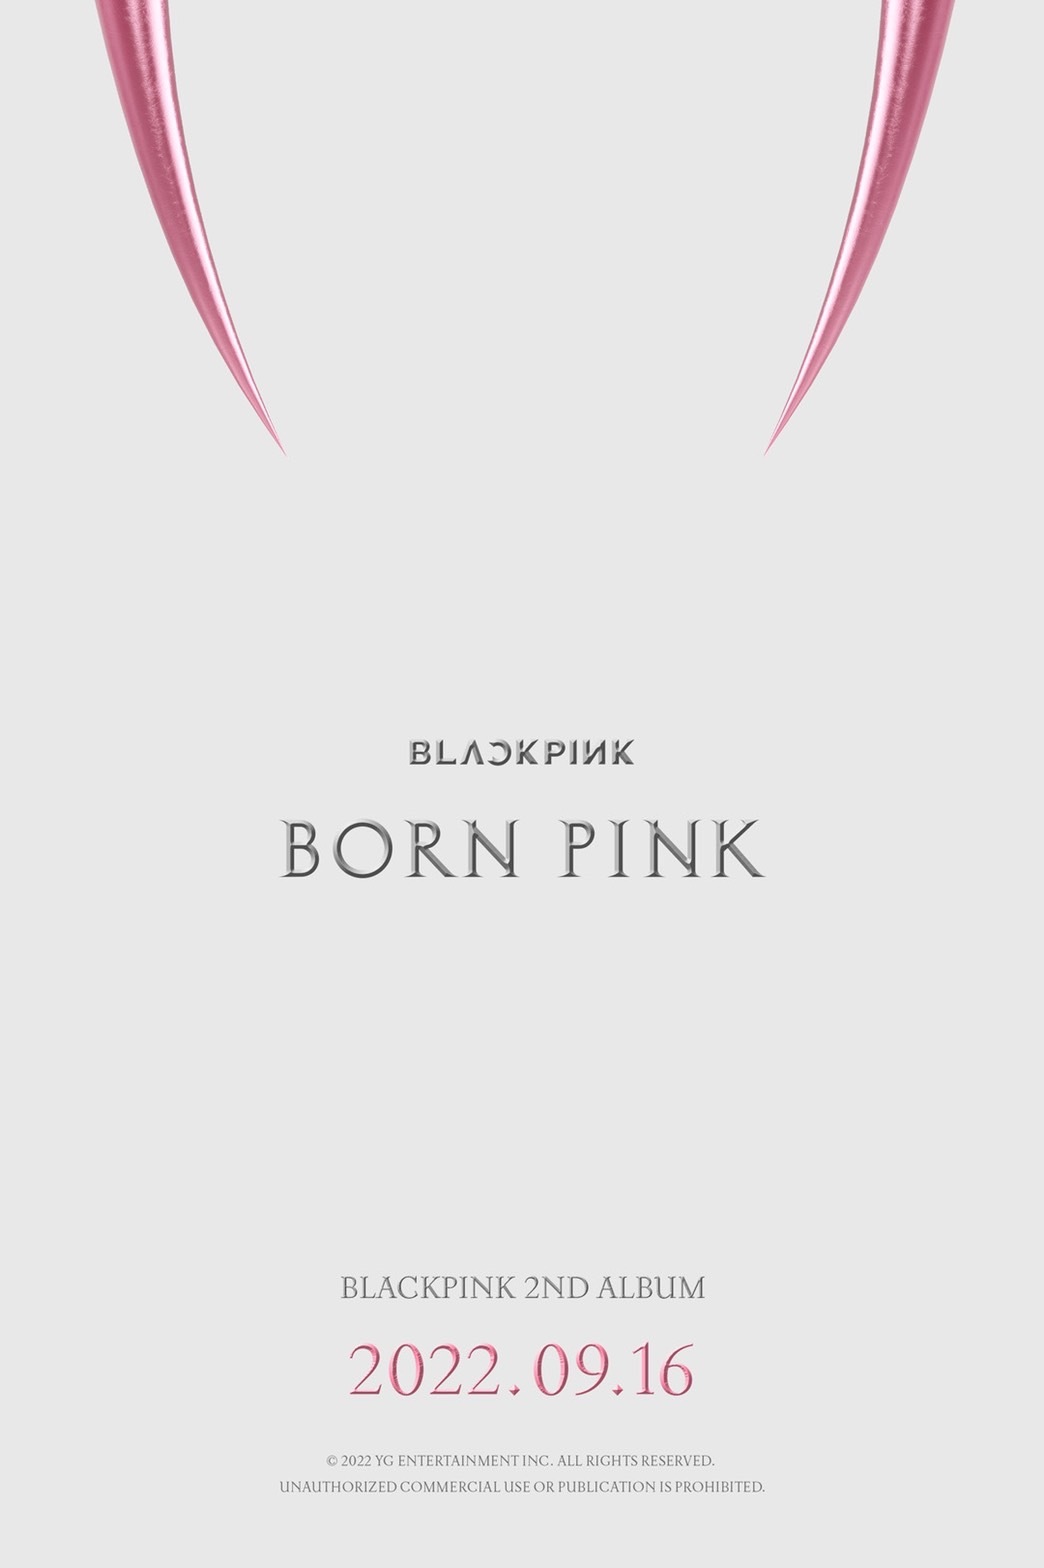 A poster image for Blackpink’s 2nd LP “Born Pink” (YG Entertainment)